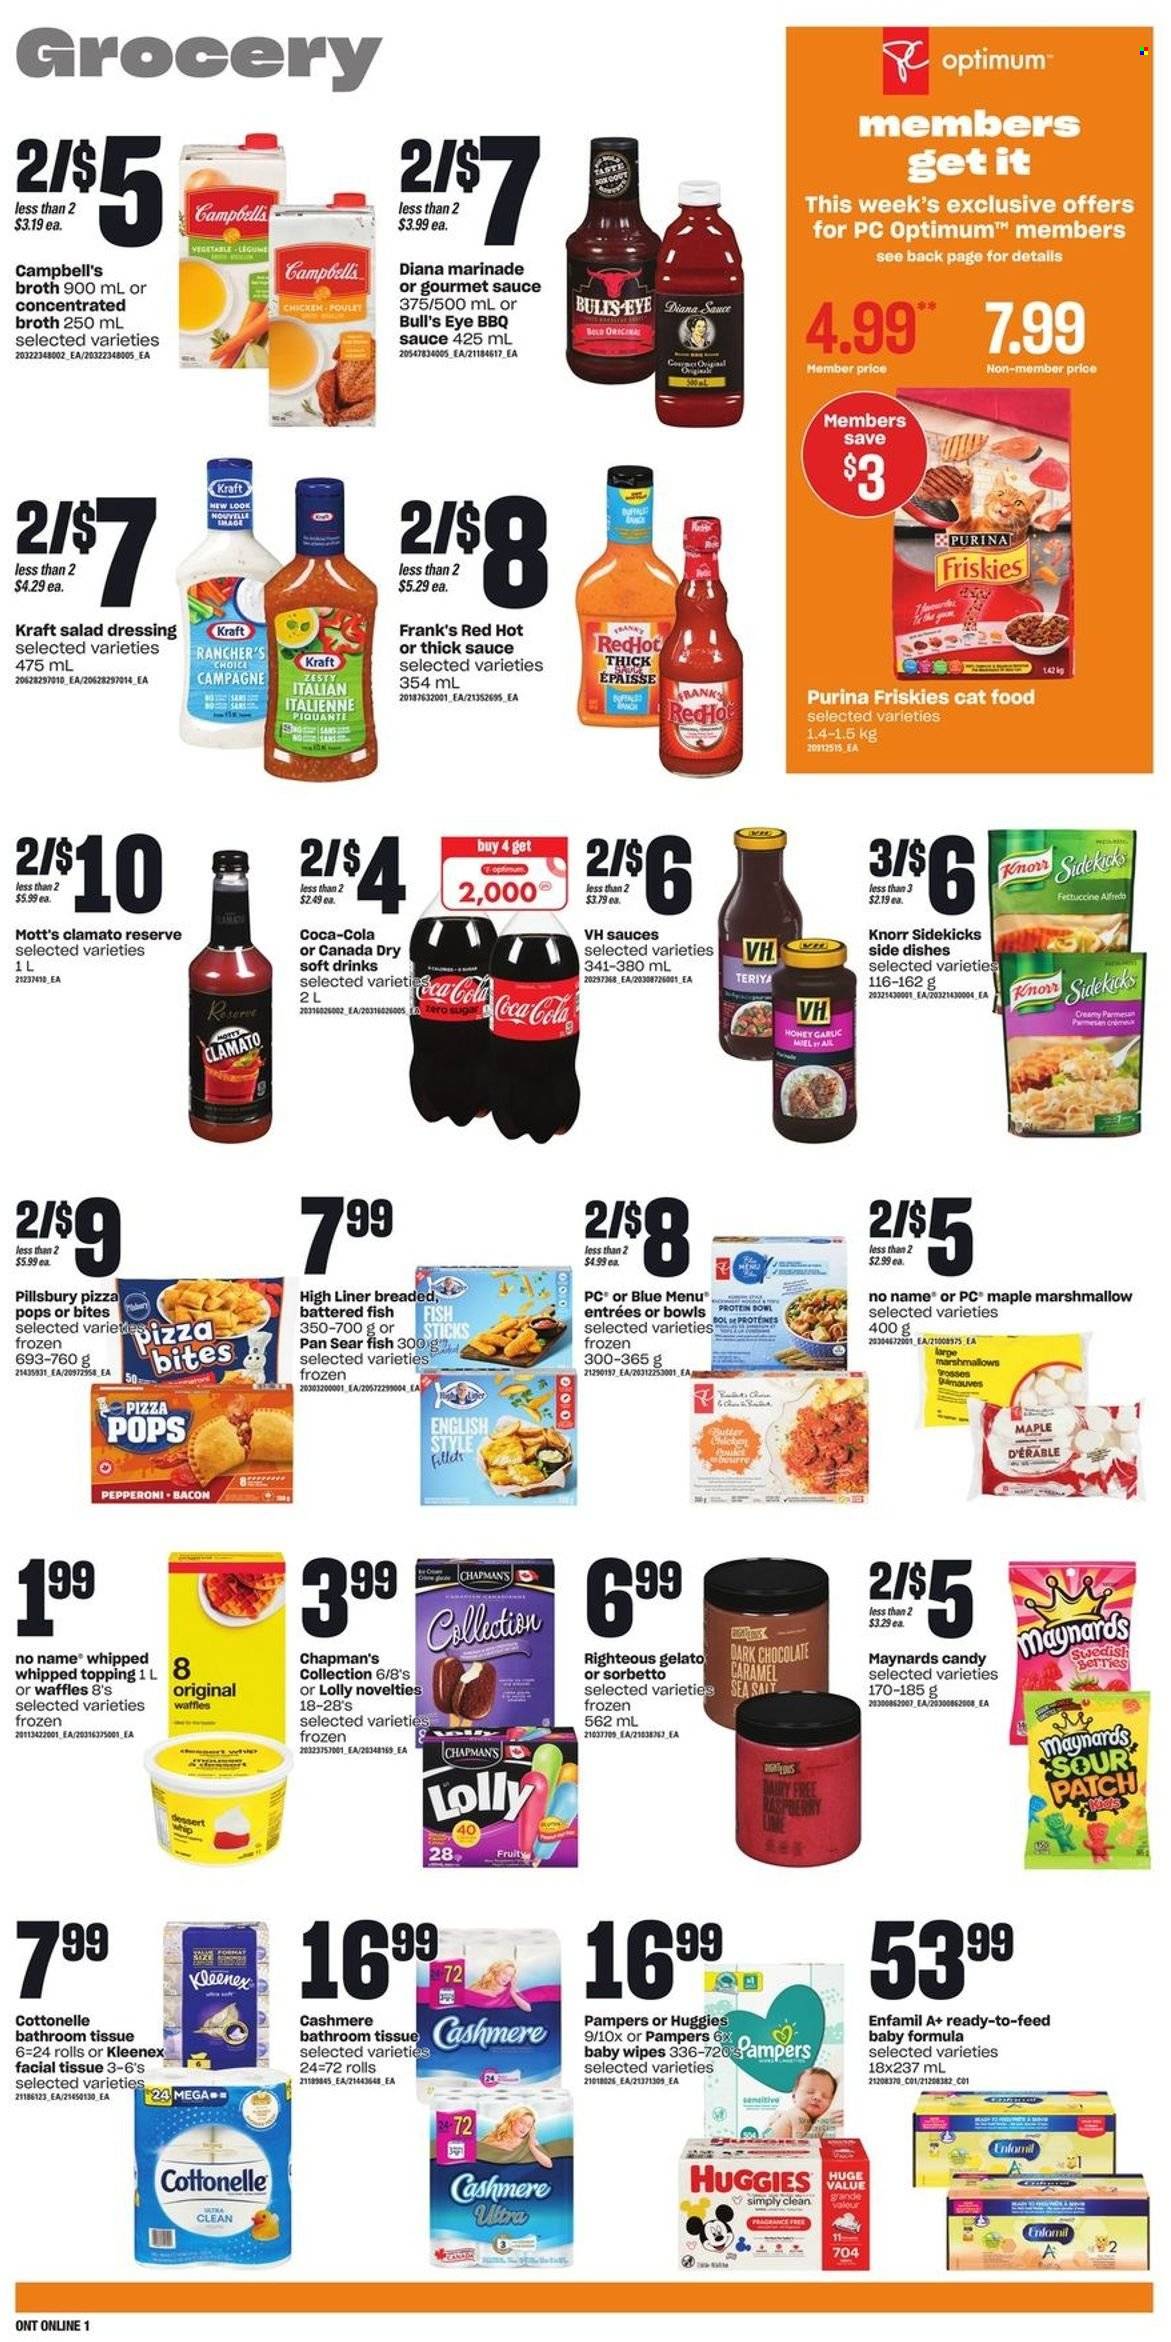 thumbnail - Loblaws Flyer - May 12, 2022 - May 18, 2022 - Sales products - waffles, Mott's, fish, No Name, Campbell's, pizza, Pillsbury, Kraft®, bacon, pepperoni, parmesan, butter, gelato, marshmallows, chocolate, lollipop, dark chocolate, sugar, topping, broth, BBQ sauce, caramel, salad dressing, dressing, marinade, honey, Canada Dry, Coca-Cola, Clamato, soft drink, Enfamil, wipes, baby wipes, bath tissue, Cottonelle, Kleenex, animal food, cat food, Purina, Optimum, Friskies, Huggies, Pampers, Knorr. Page 5.